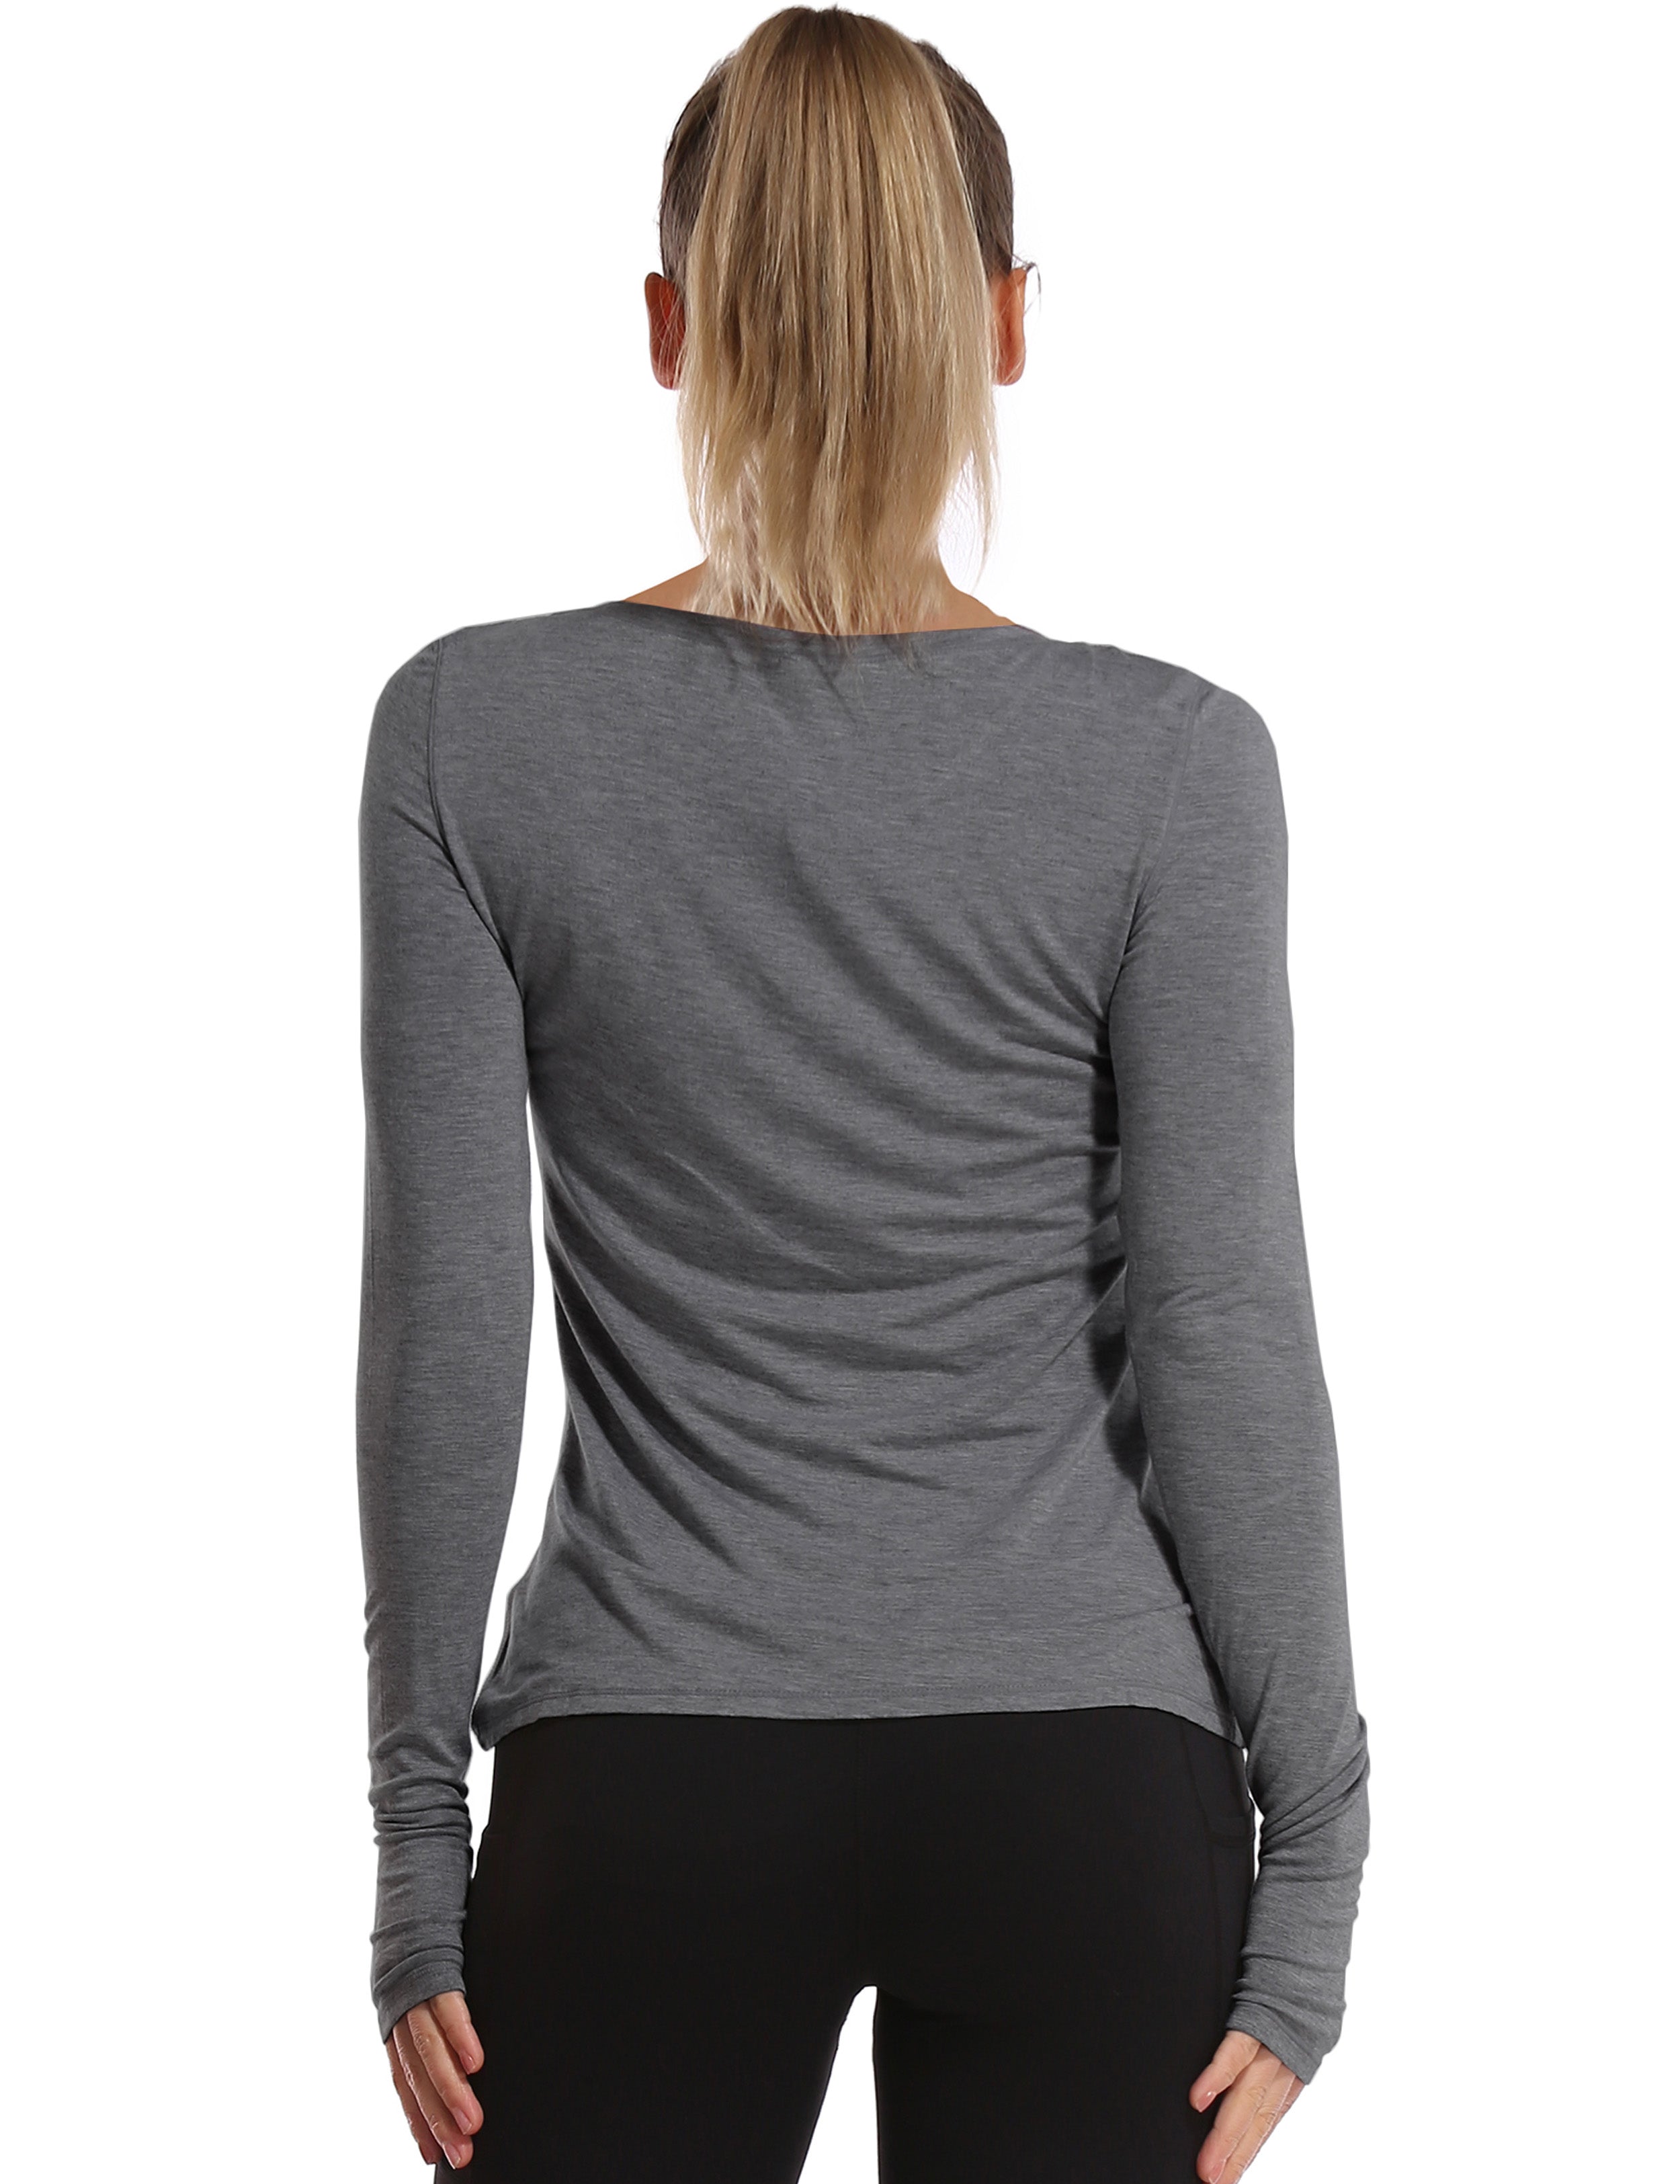 Athlete Long Sleeve Tops heathercharcoal Designed for On the Move Slim fit 93%Modal/7%Spandex Four-way stretch Naturally breathable Super-Soft, Modal Fabric